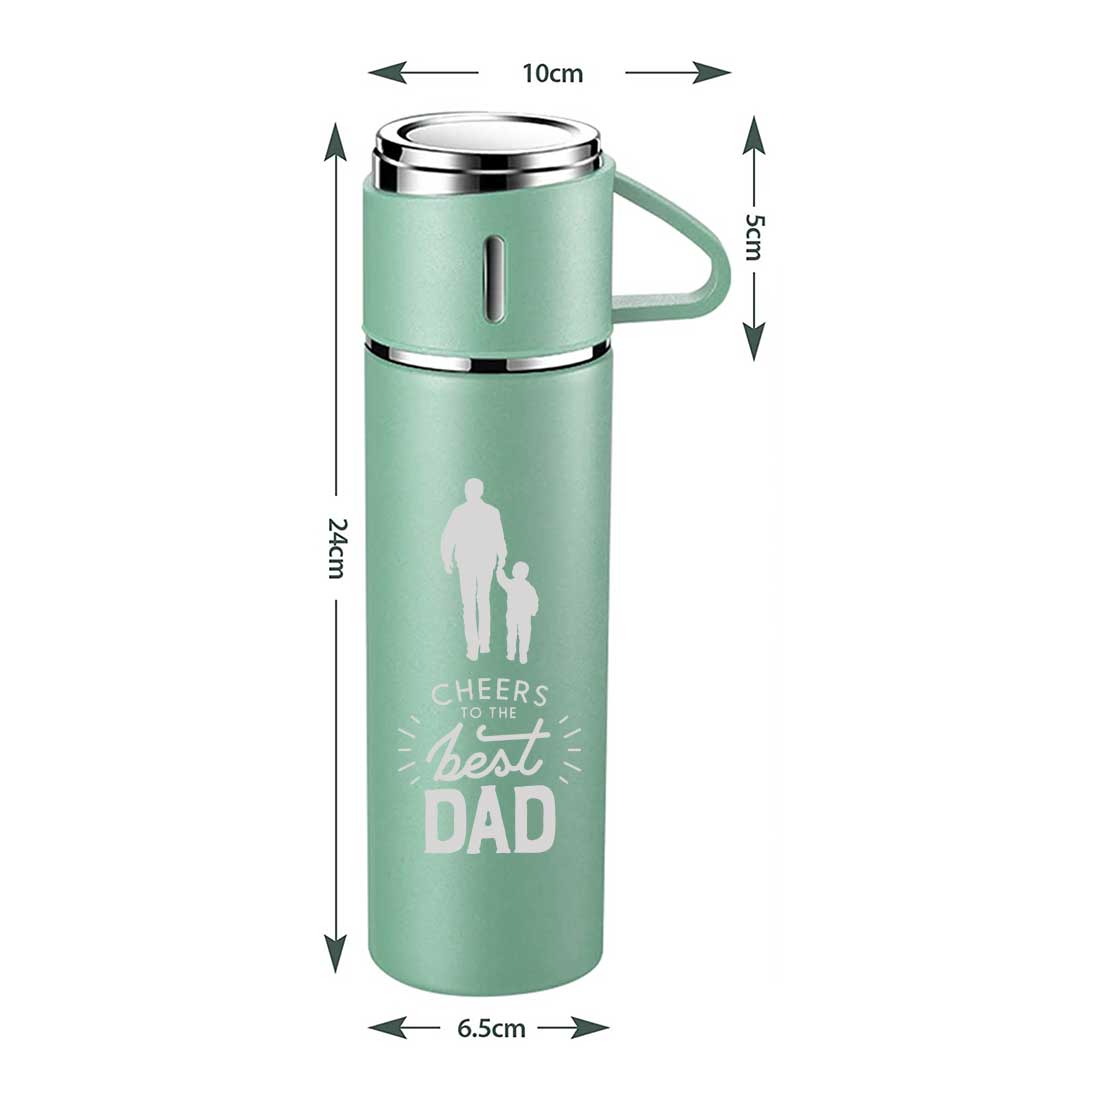 Shop 25% off Thermos.com for Father's Day! Dad will love Thermos products  to keep his coffee hot, his beer cold and h…